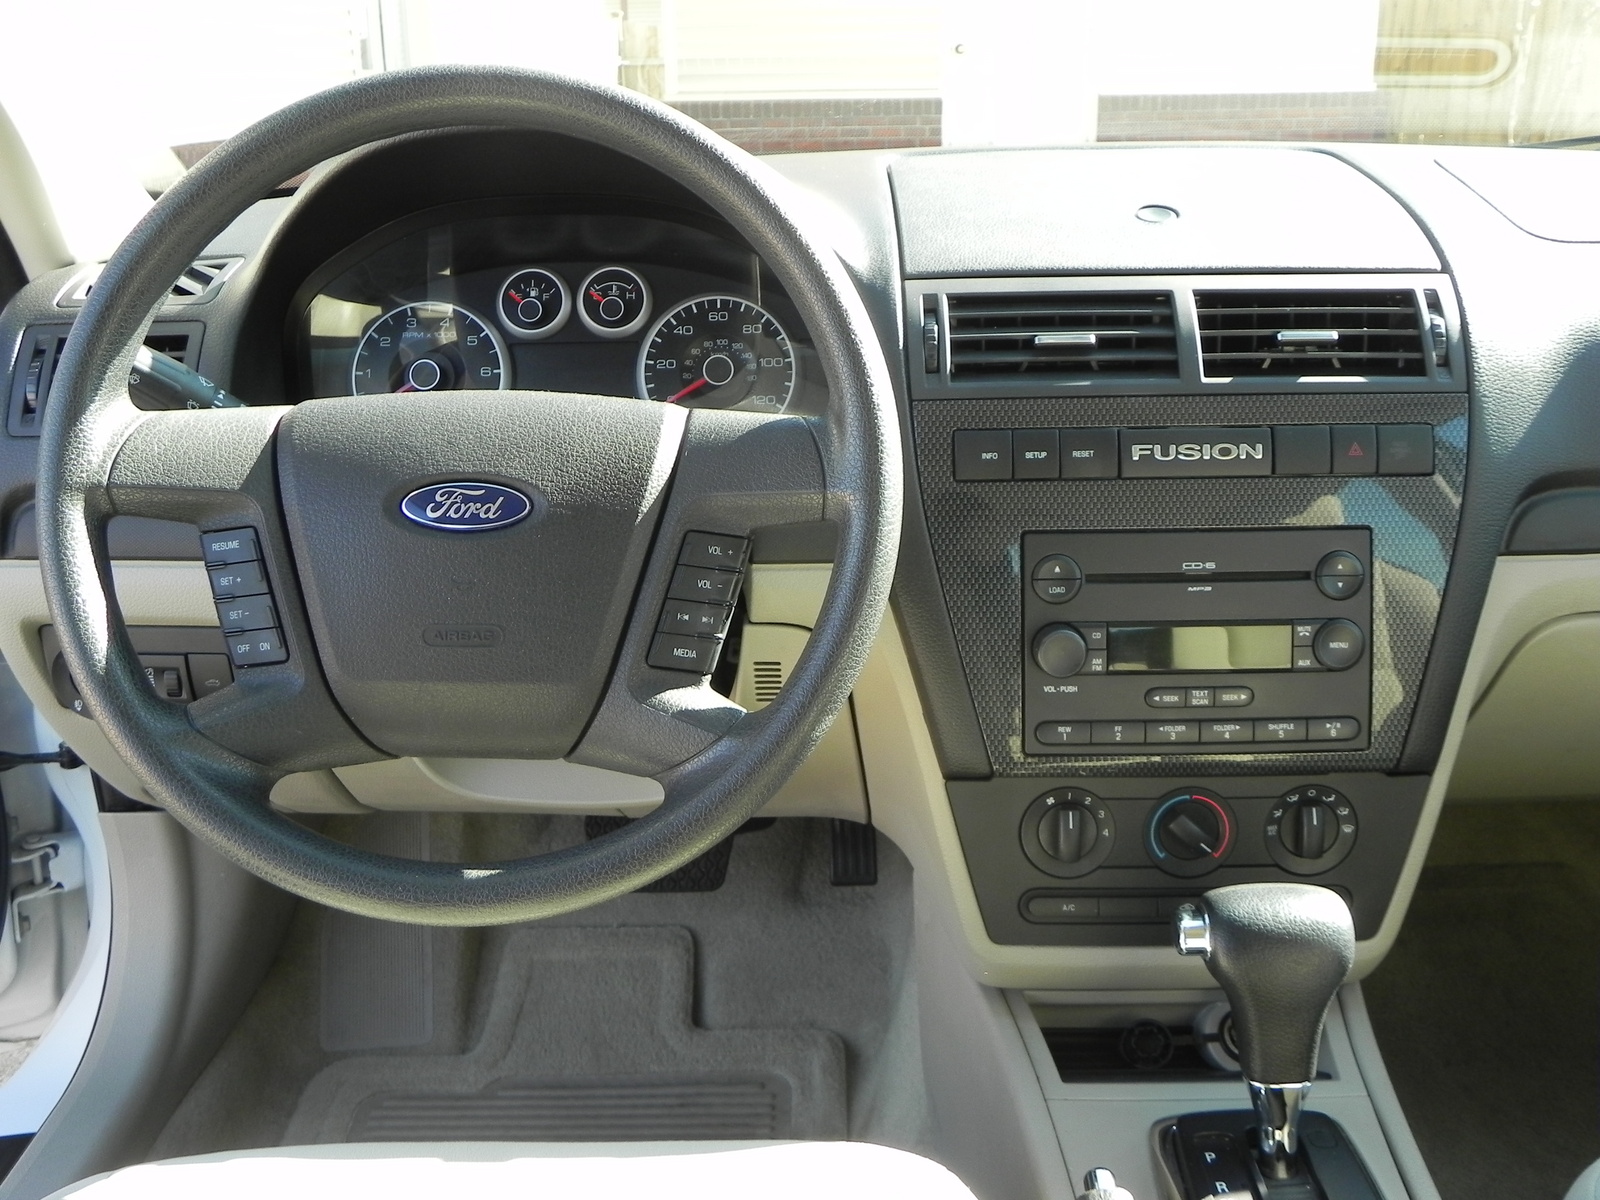 2007 Ford fusion reviews canada #6